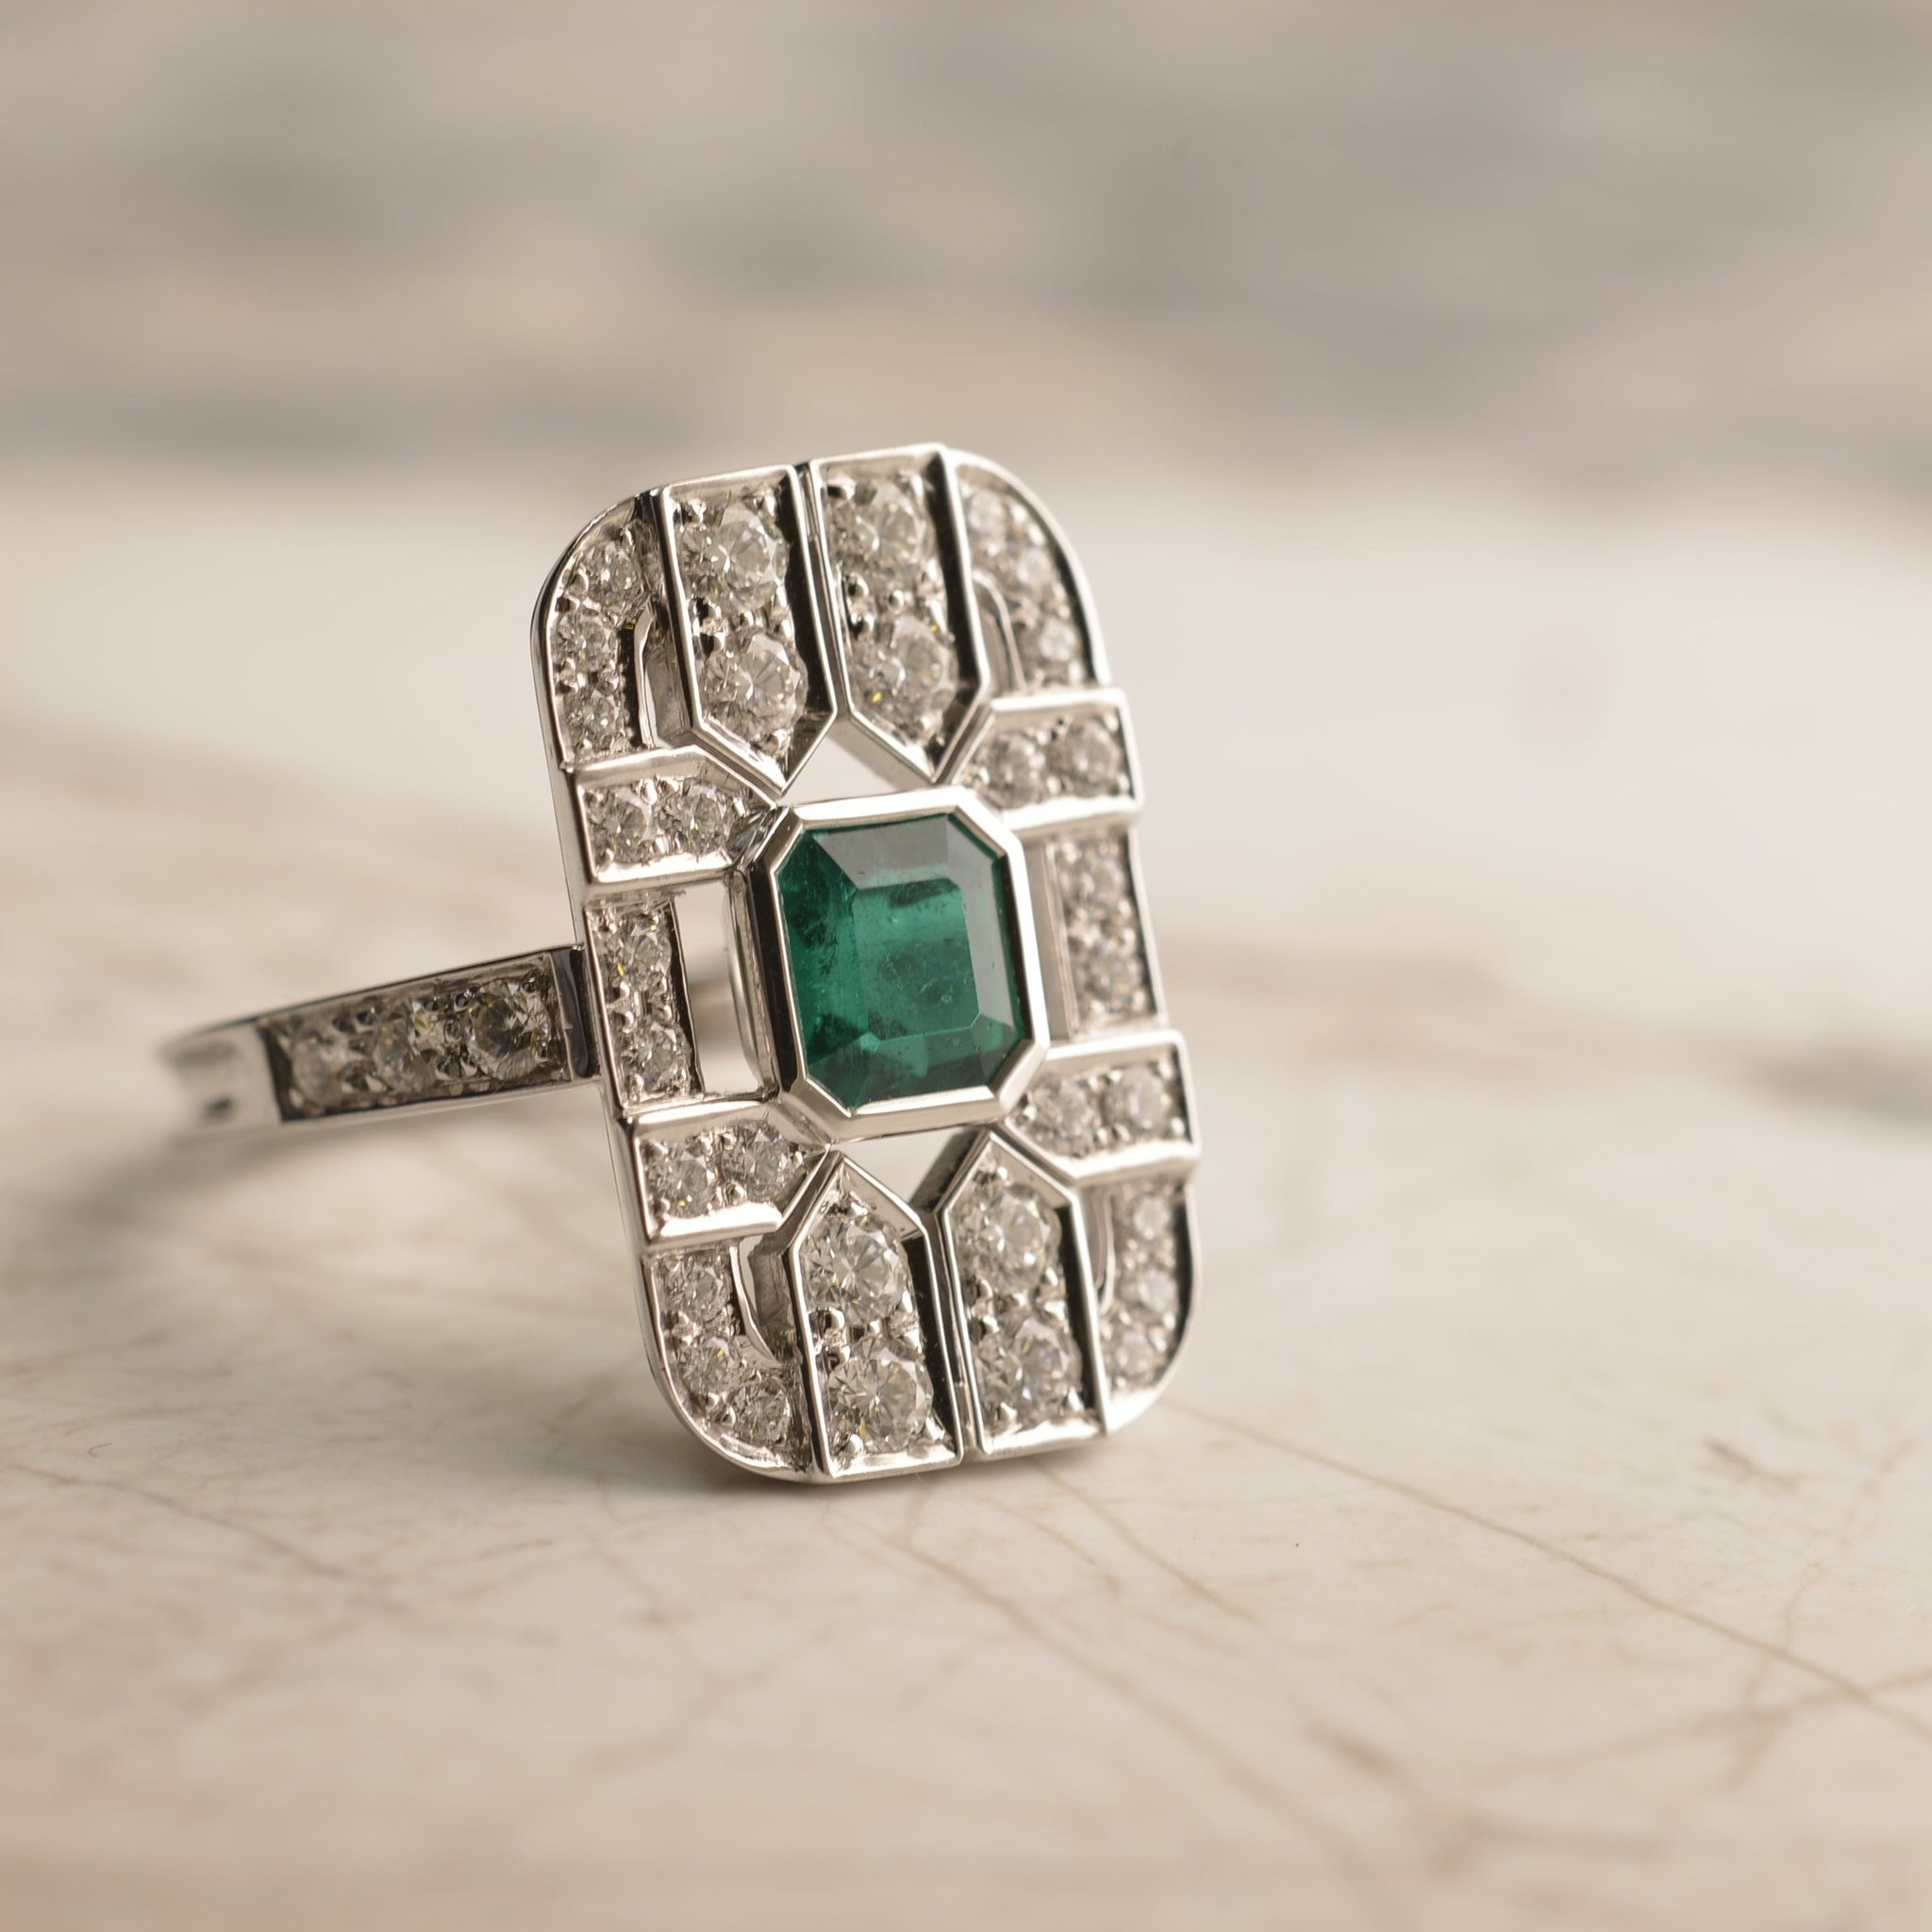 Colombian Emerald, Art Deco Style Tablet Ring